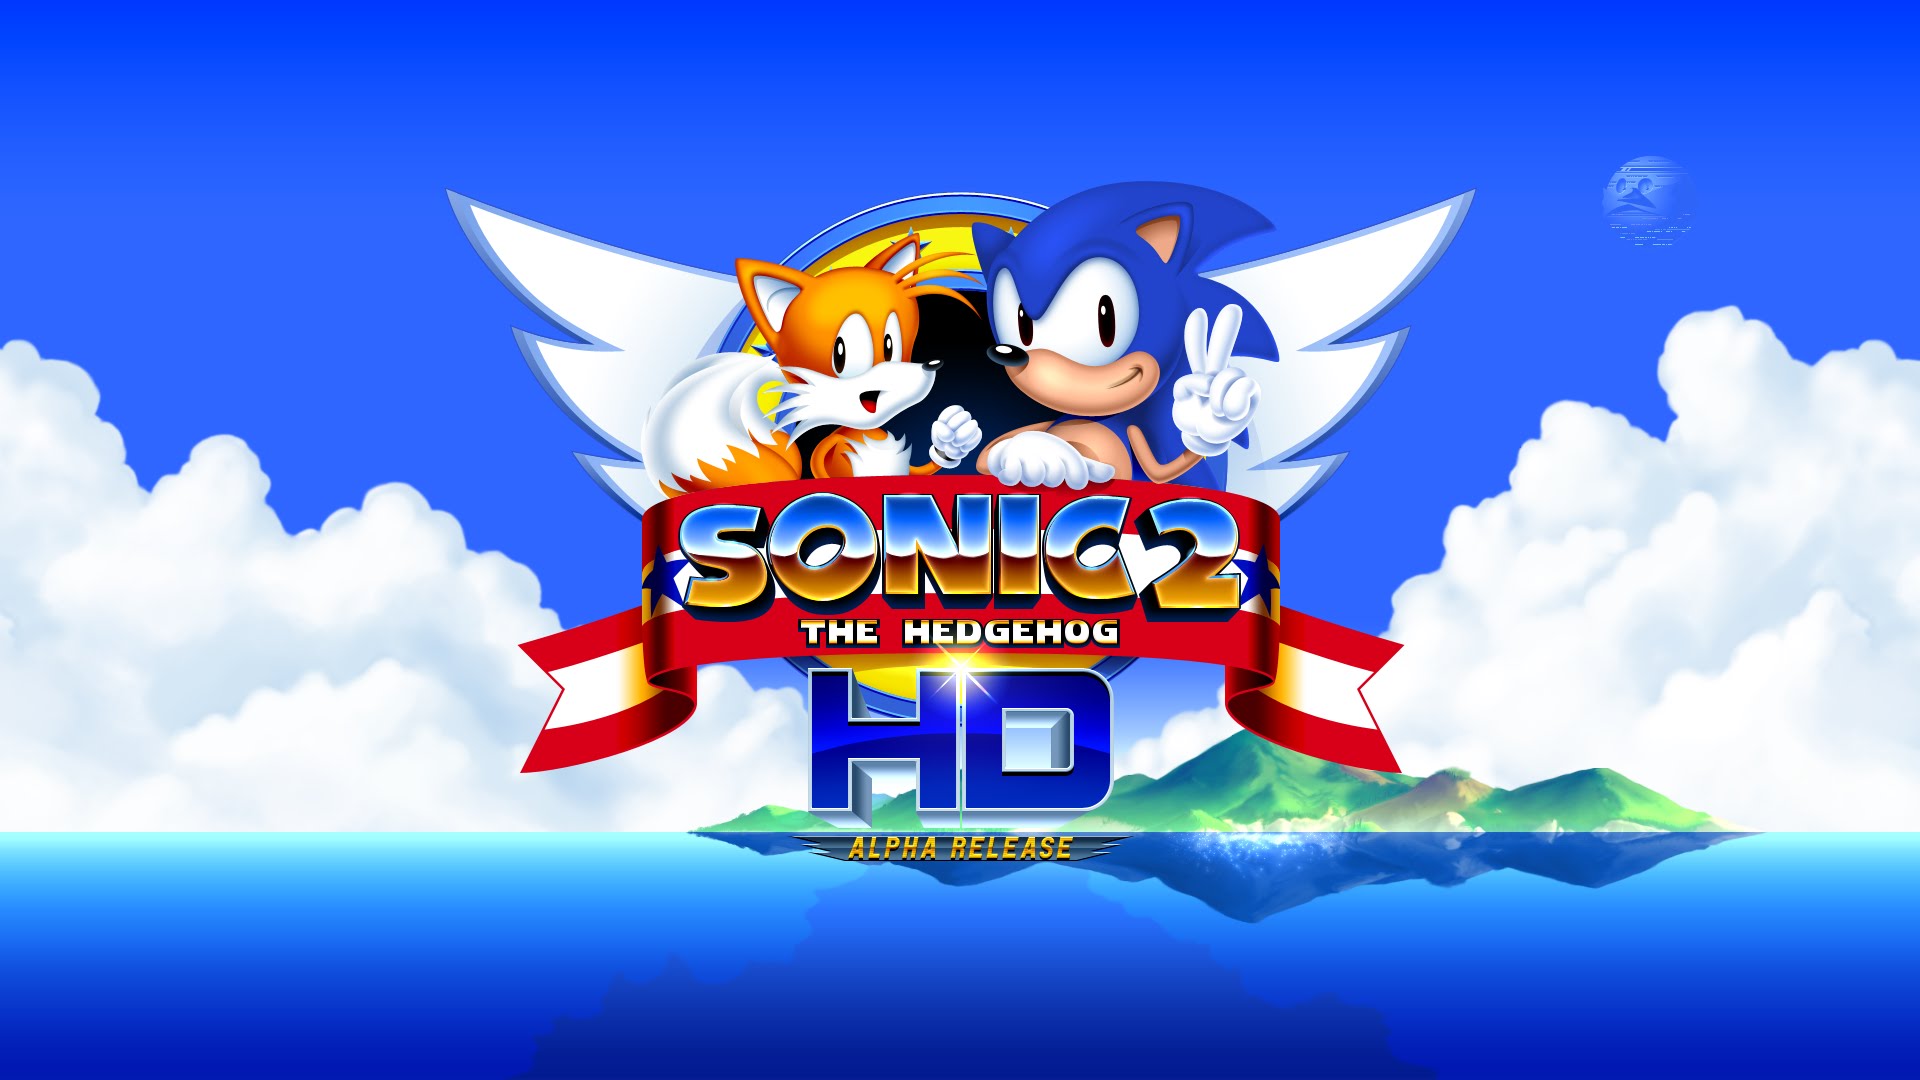 Sonic The Hedgehog 2 wallpapers, Video Game, HQ Sonic The Hedgehog 2